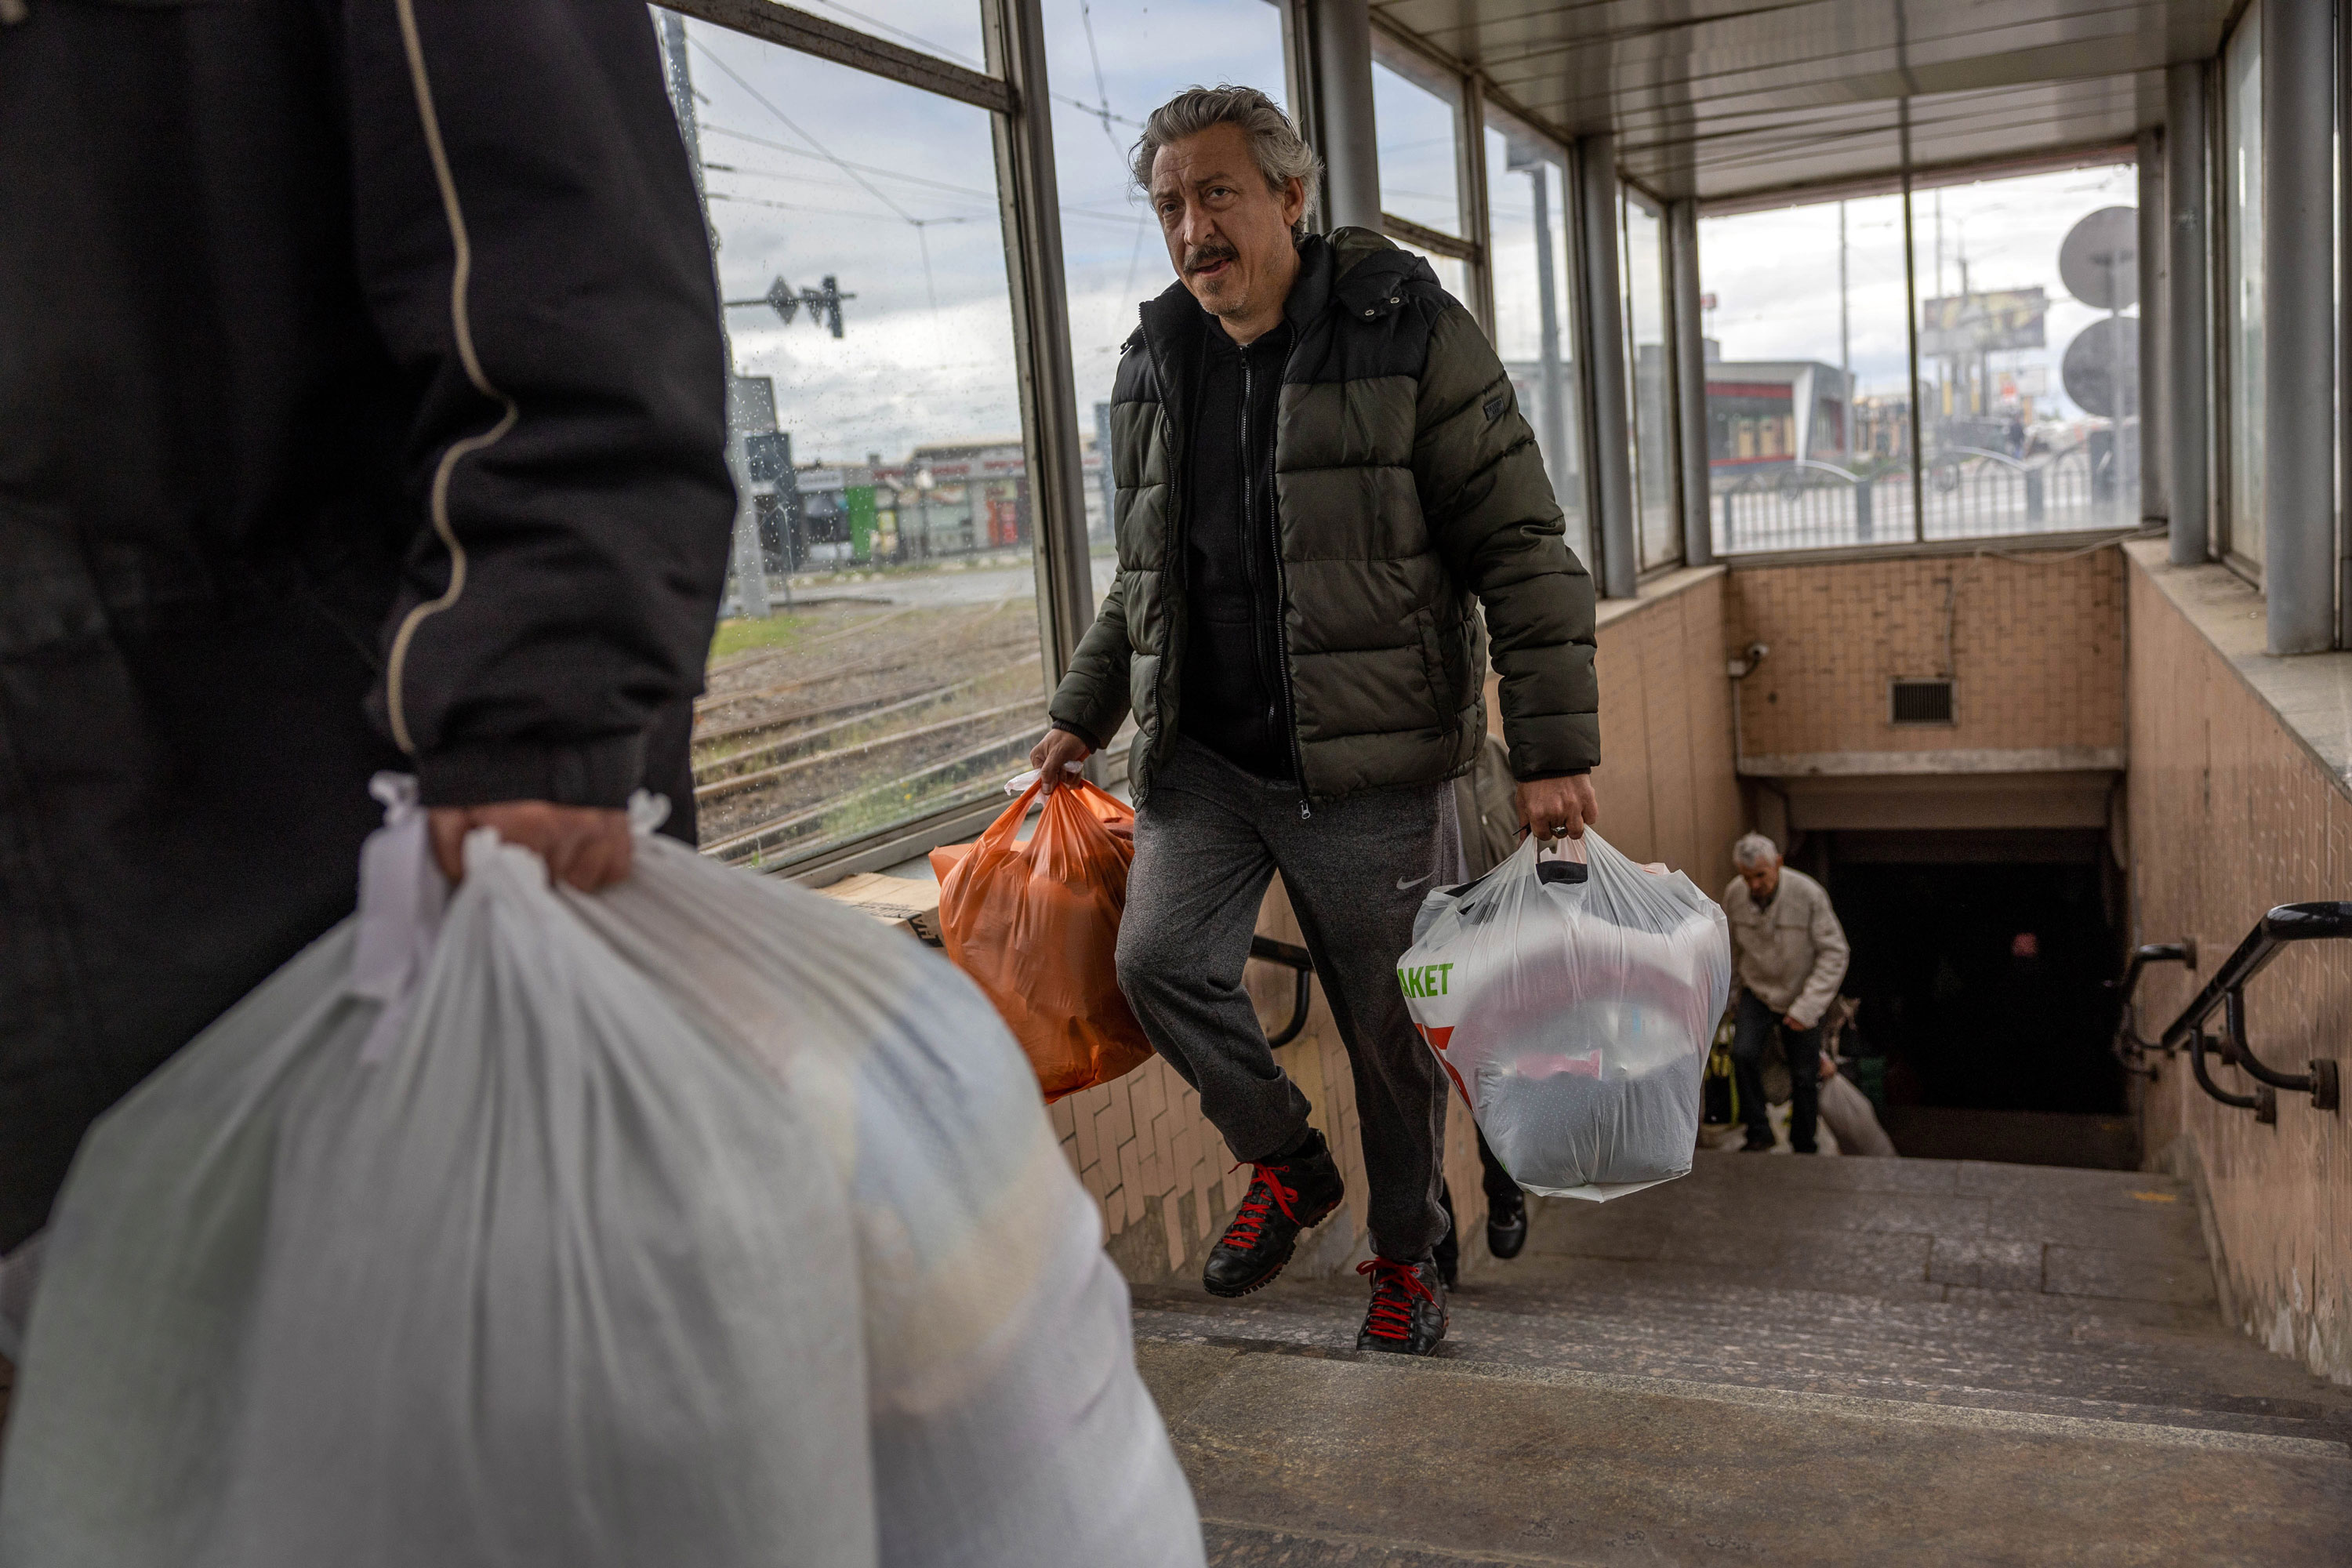 People displaced by Russian shelling depart a metro station where many have been living underground for months in Kharkiv, on Sunday, May 22.